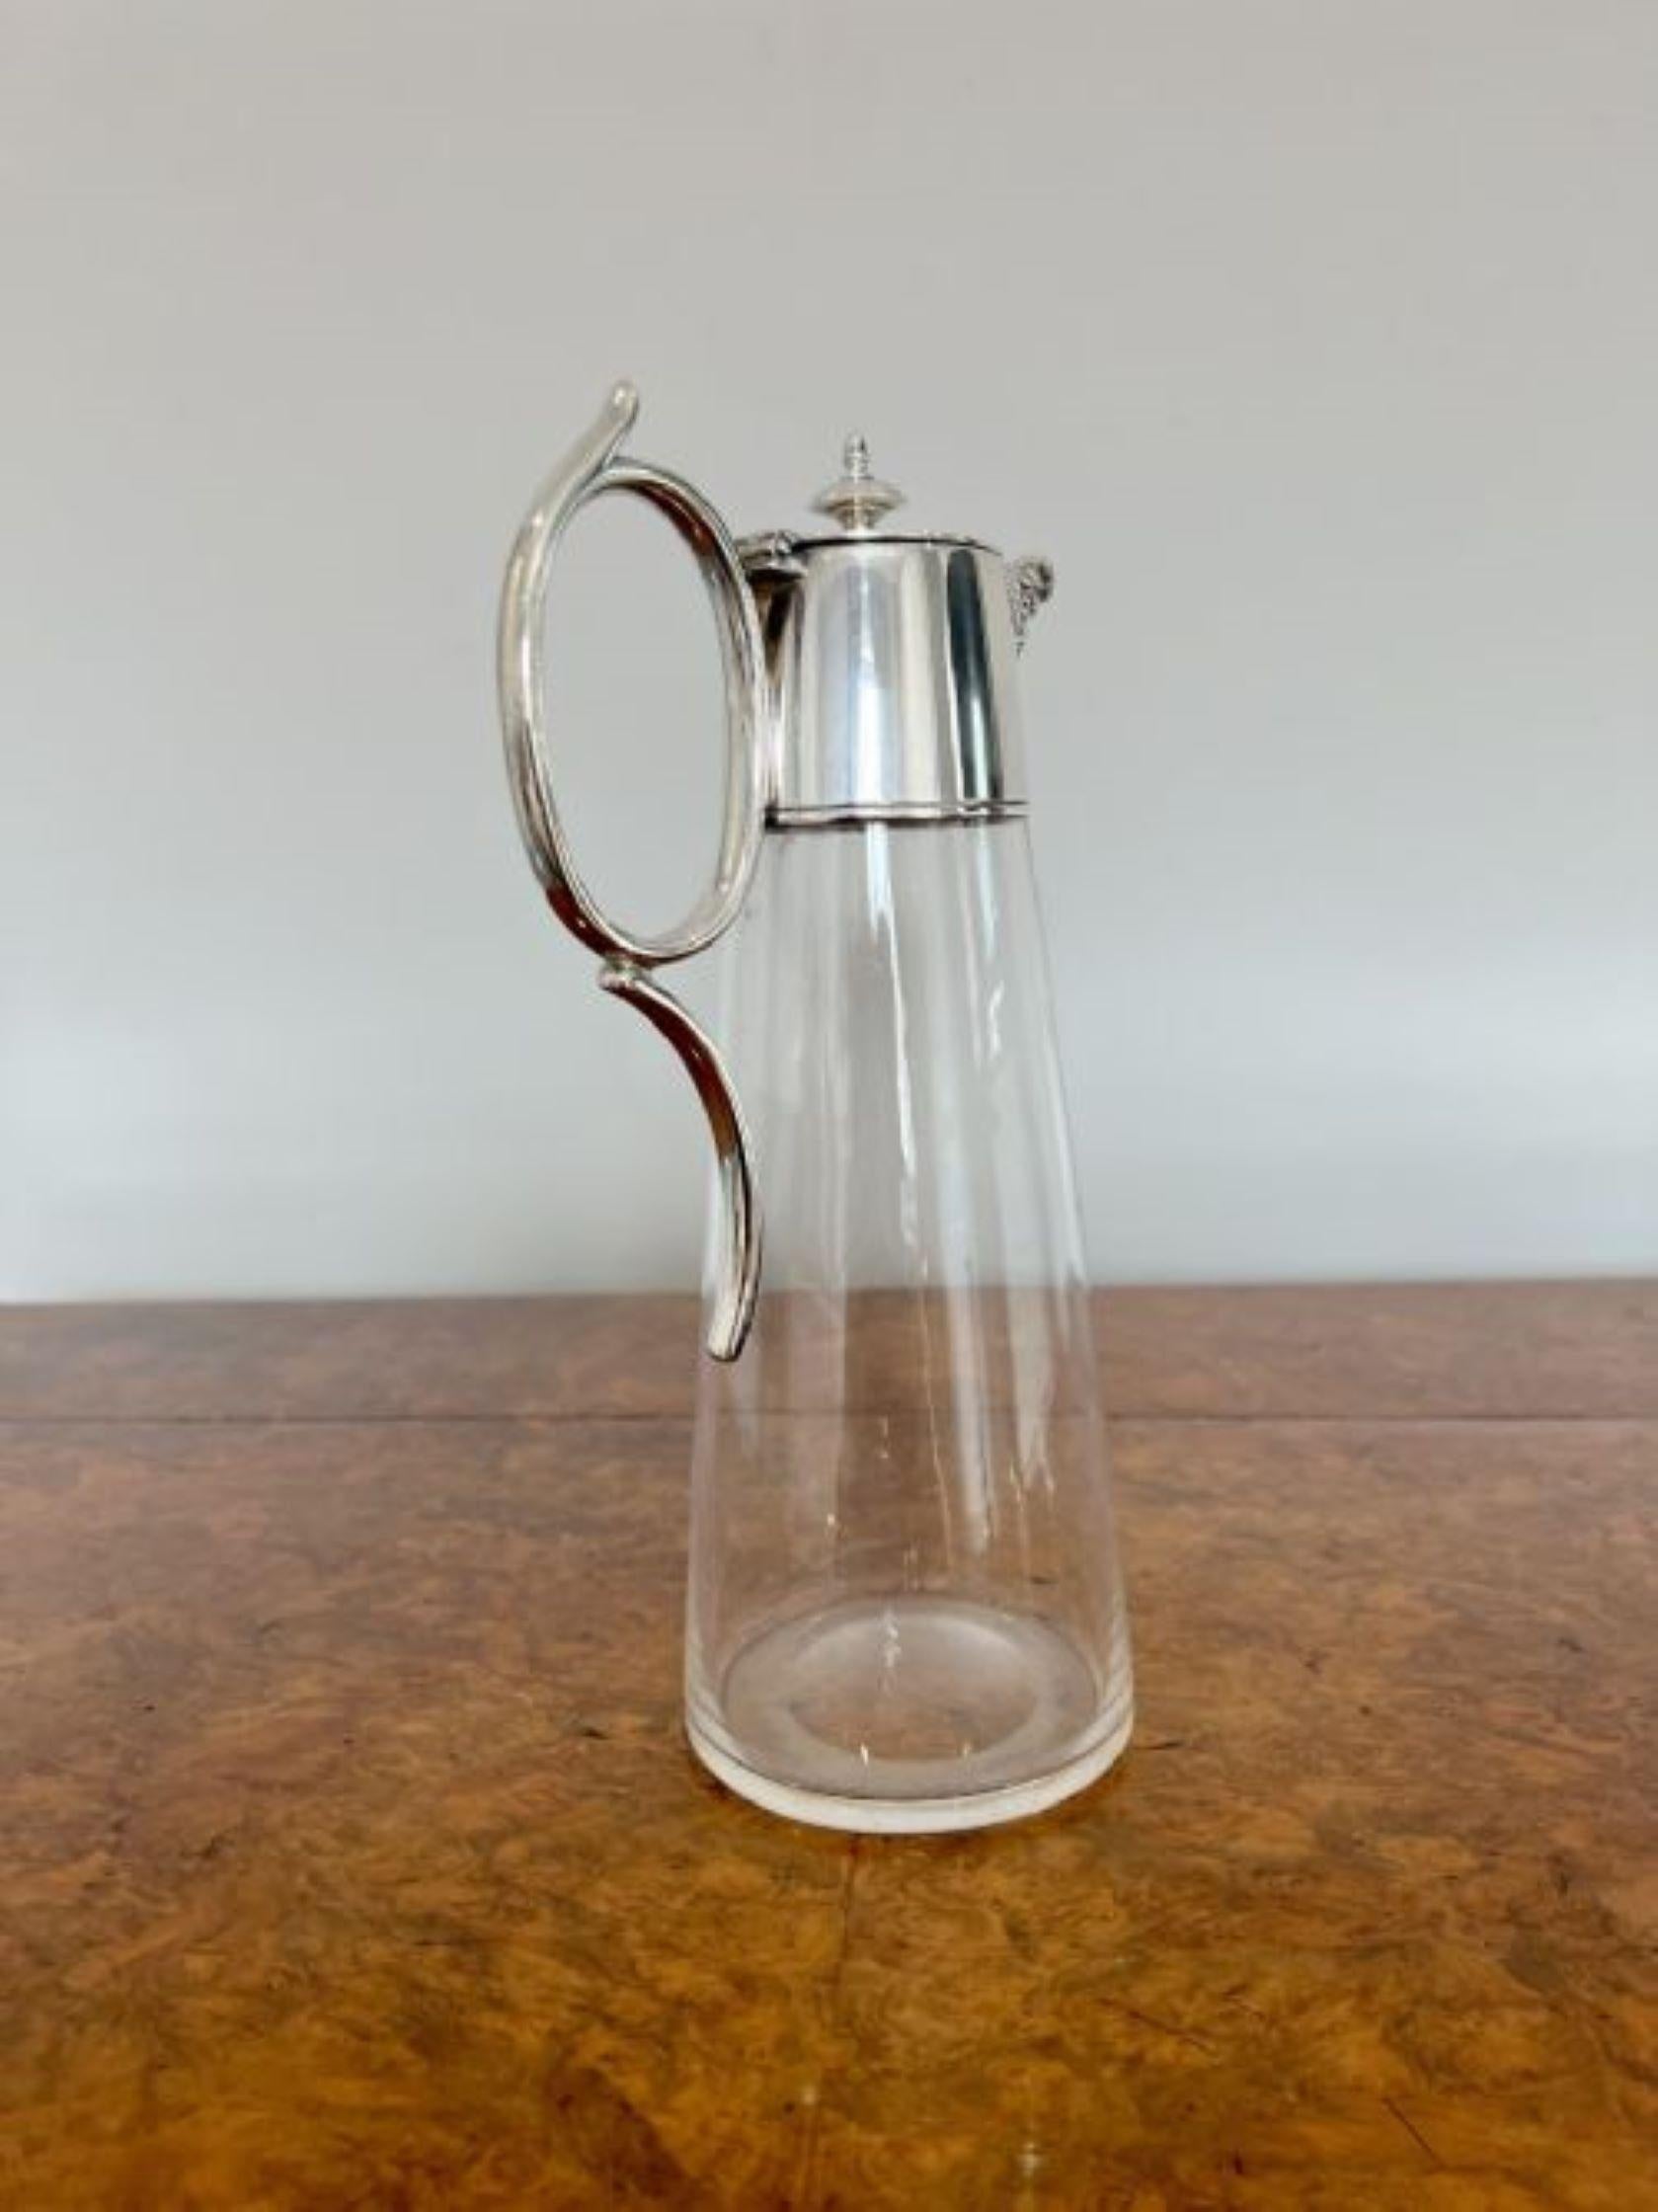 Quality antique Edwardian glass and silver plated claret jug having a quality antique Edwardian claret jug with a silver plated top, wonderful silver plated shaped handle with a fantastic ornate spout about a clear glass body. 
